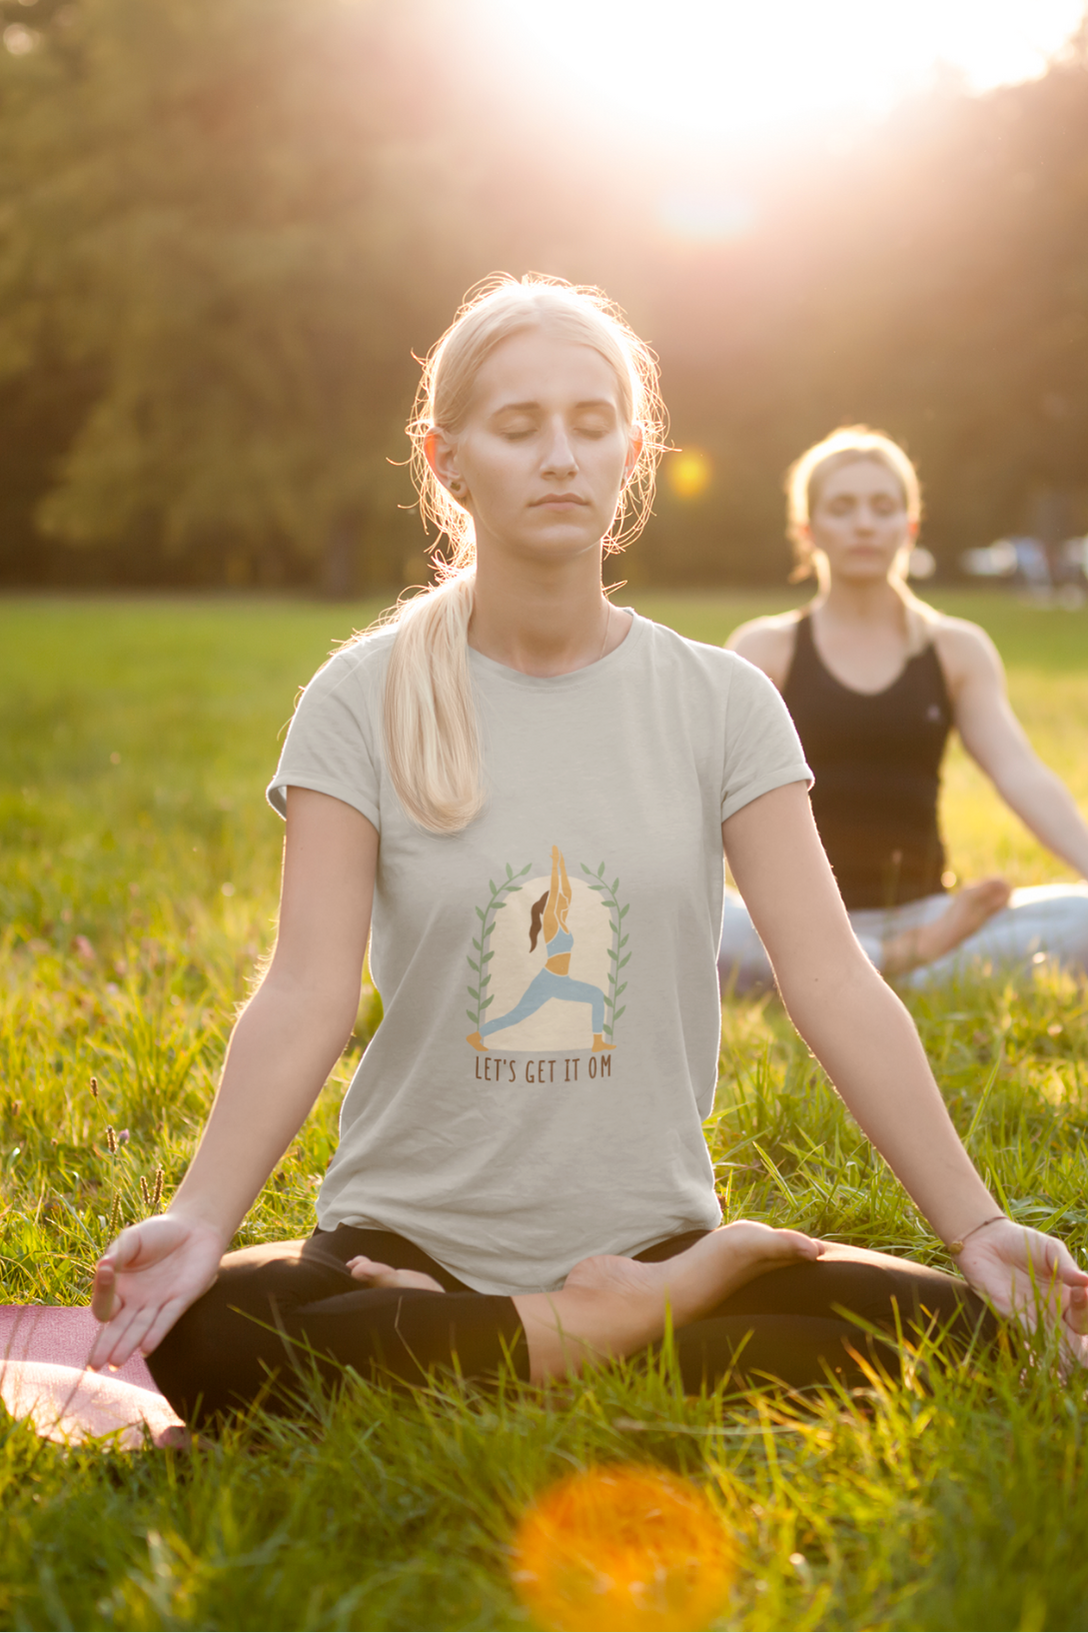 Yoga With Om Printed T-Shirt For Women - WowWaves - 3